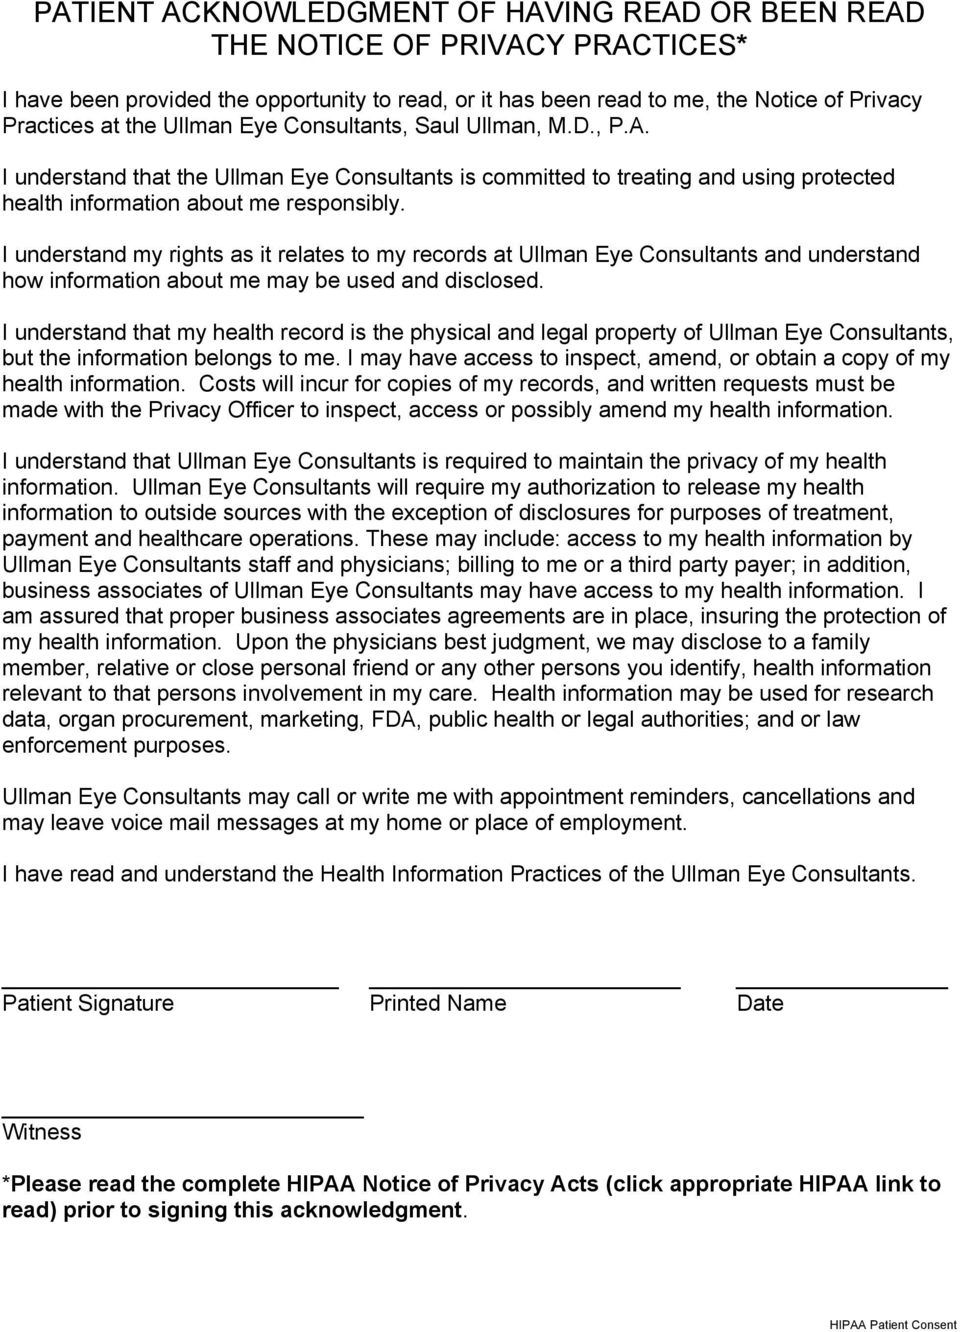 I understand my rights as it relates to my records at Ullman Eye Consultants and understand how information about me may be used and disclosed.